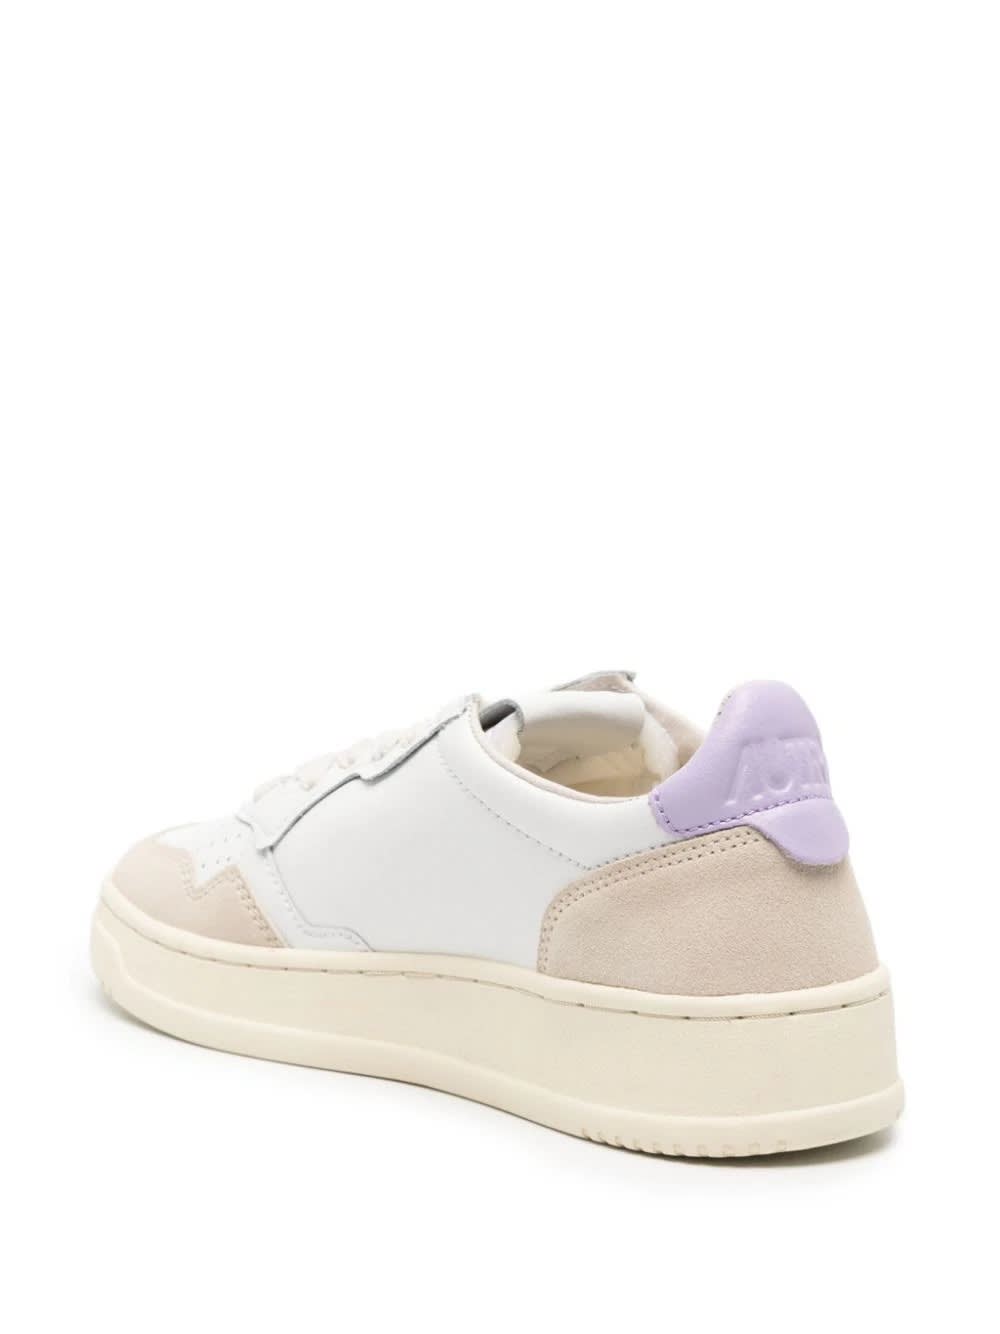 Shop Autry Medalist Low Sneakers In White And Lilac Suede And Leather